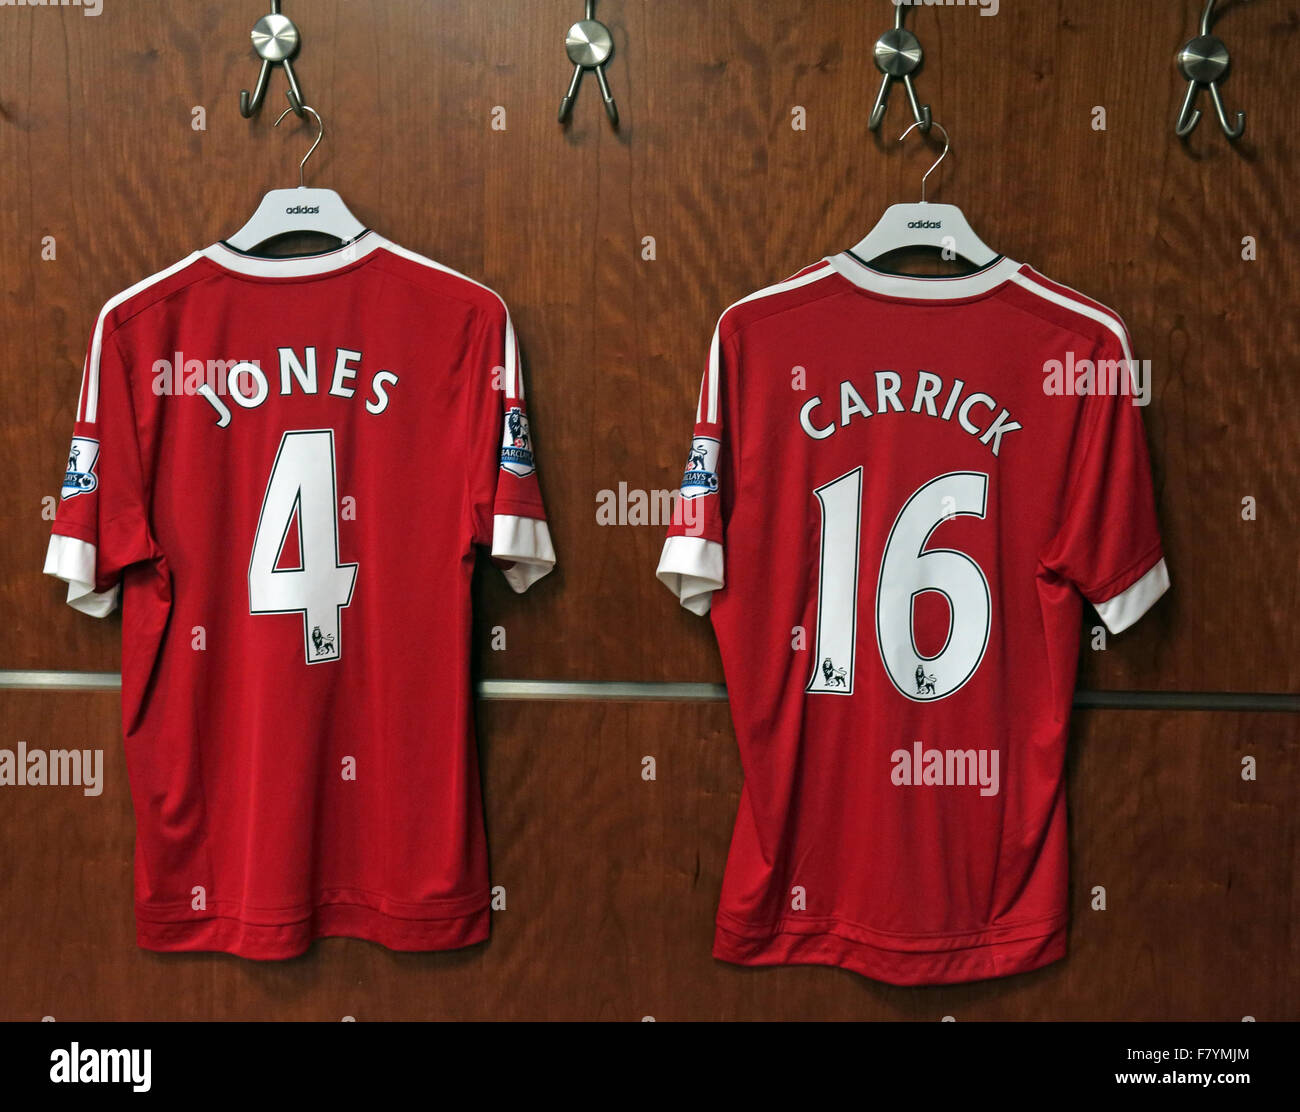 Jones & Carrick 4 & 16 red MUFC shirts, dressing room, Old Trafford, Manchester, England Stock Photo